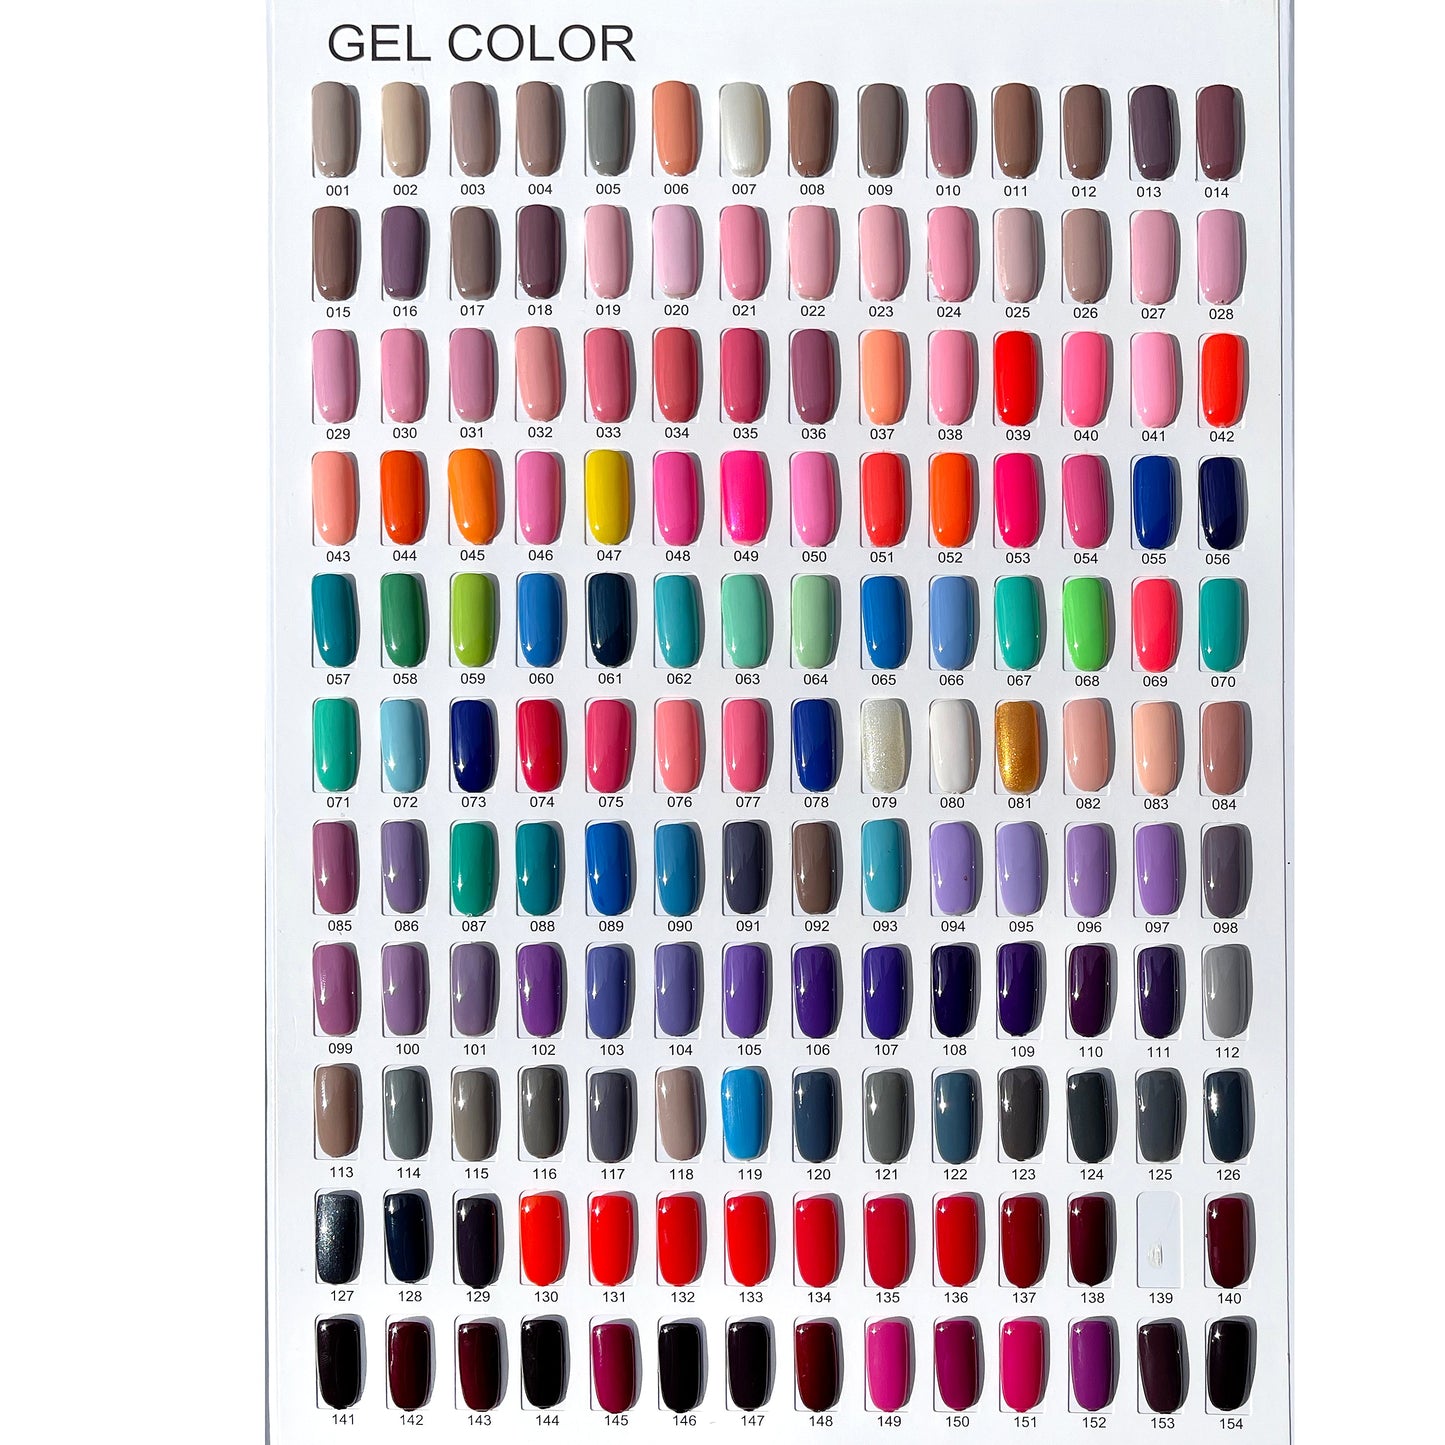 Bossy Gel Duo - Gel Polish + Nail Lacquer (15ml) # BS15